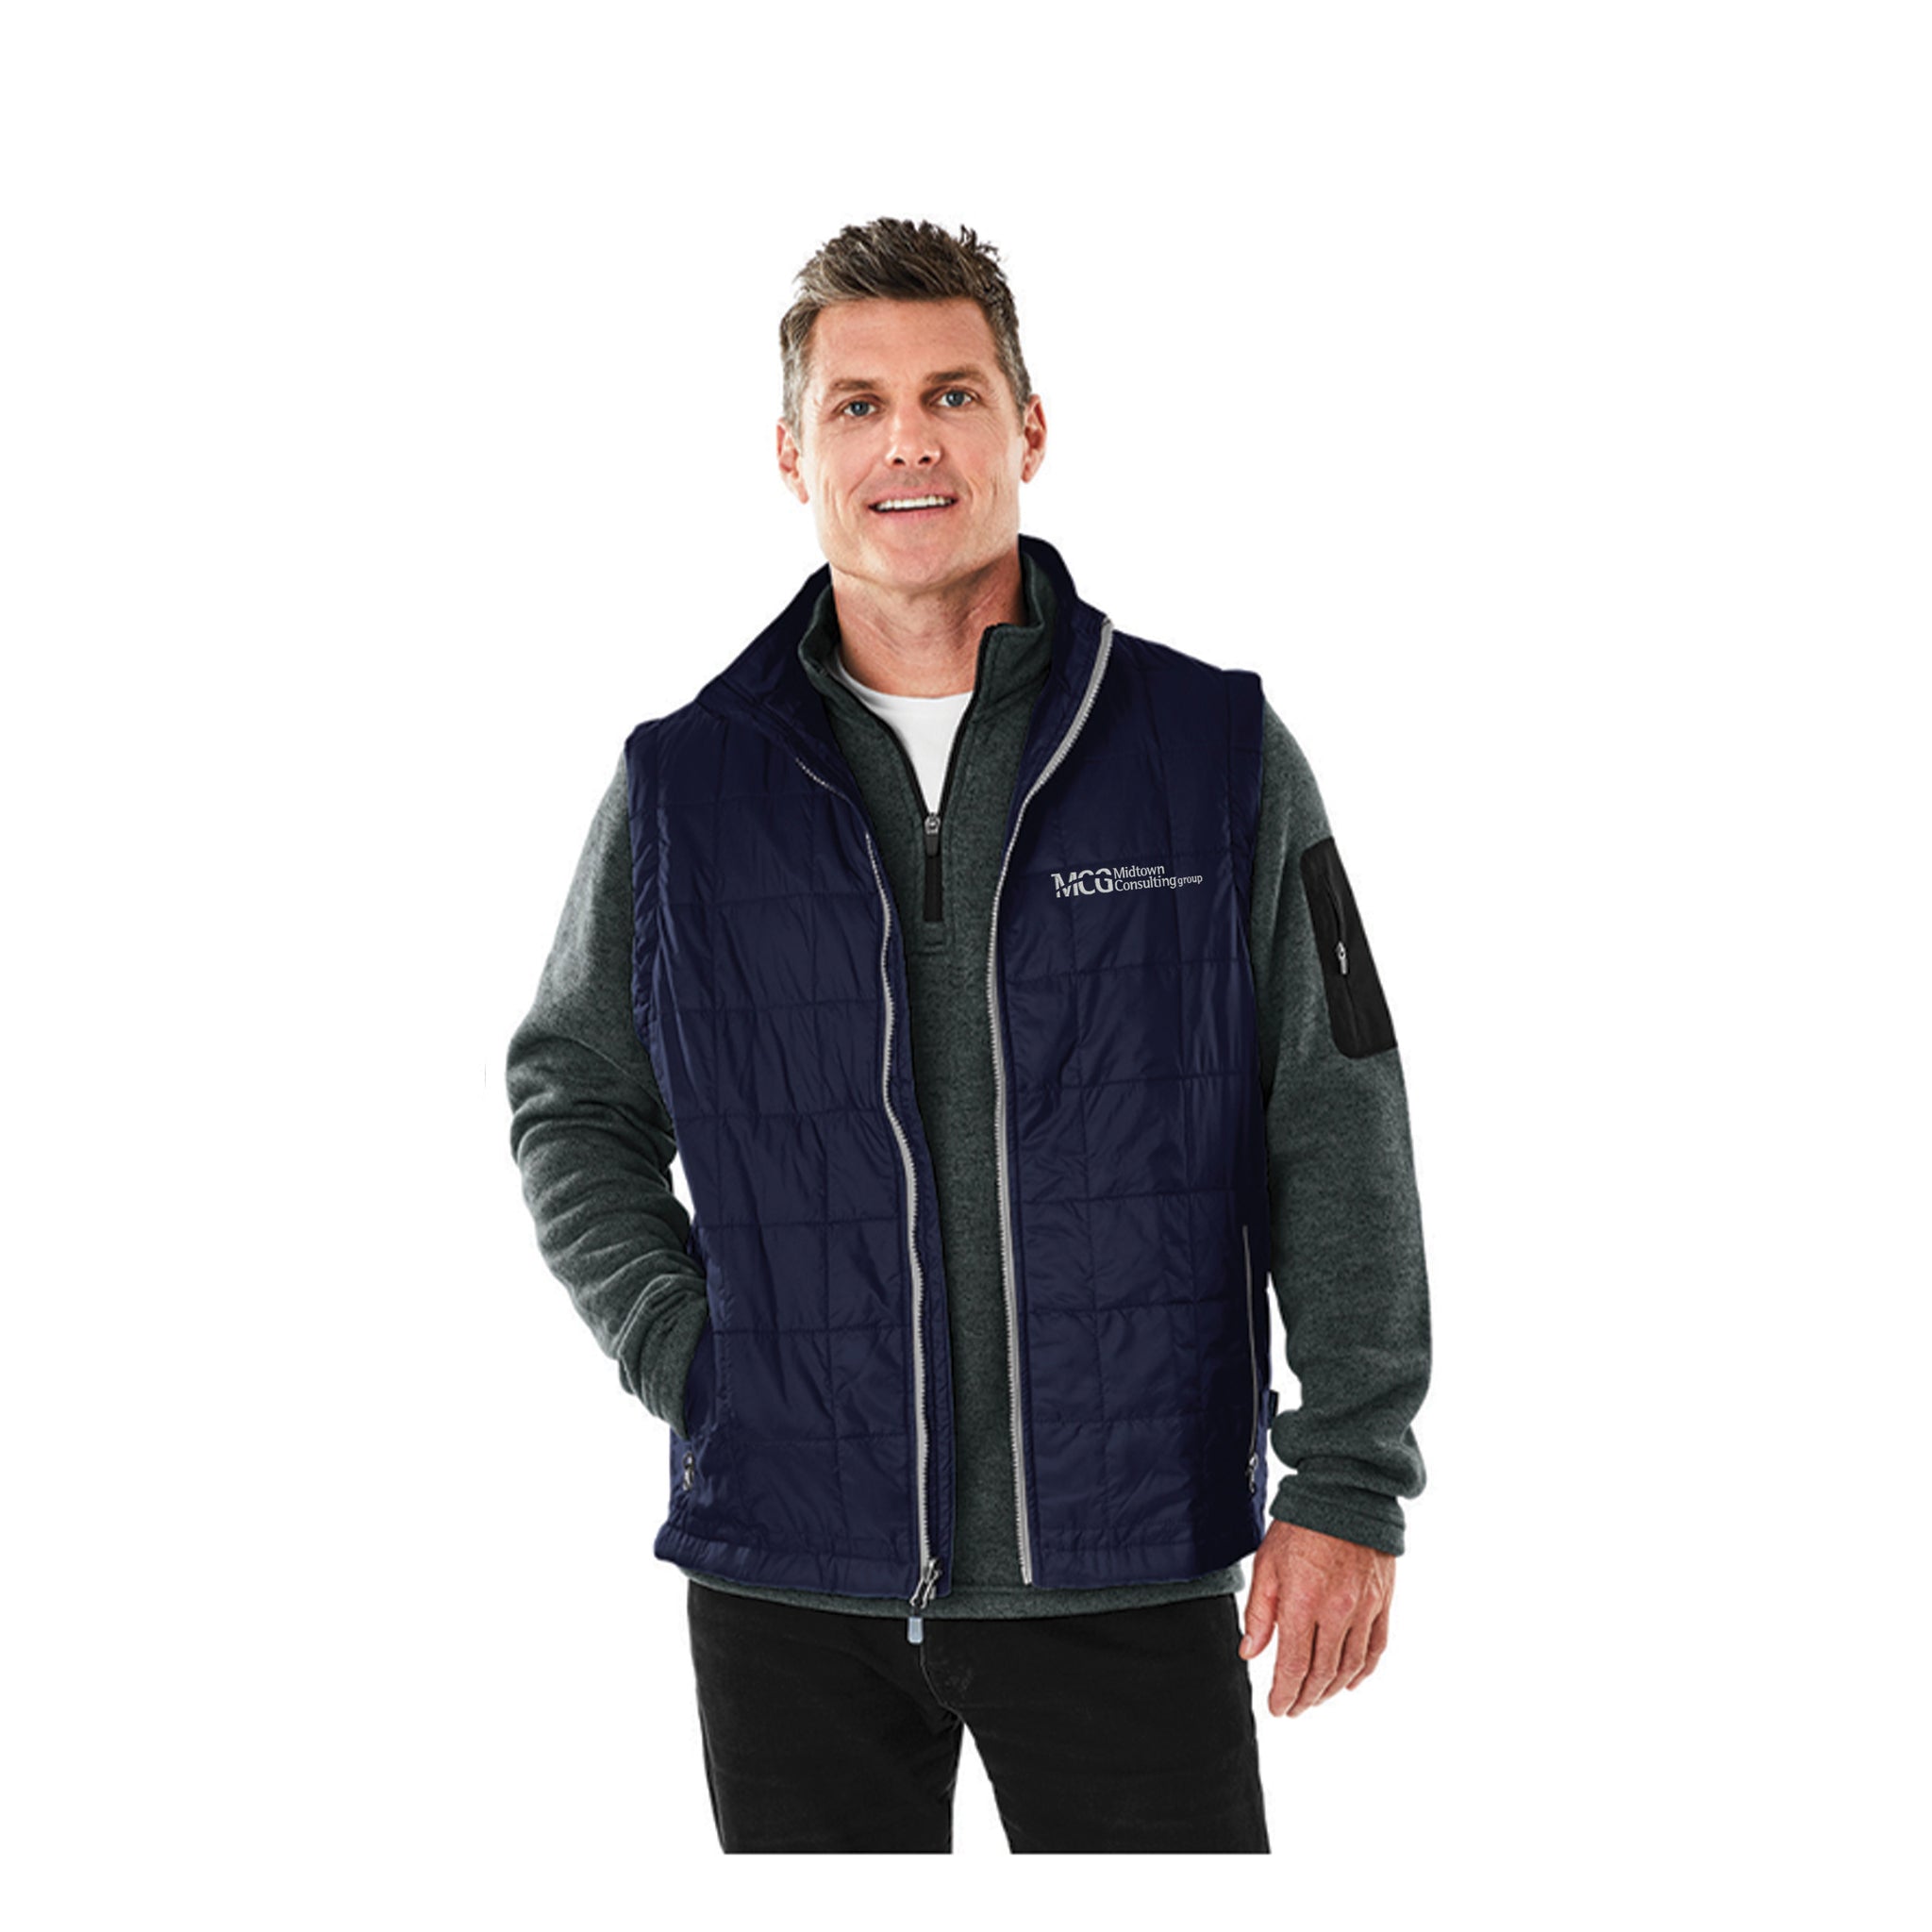 Charles River - Radius Quilted Vest. 9535.